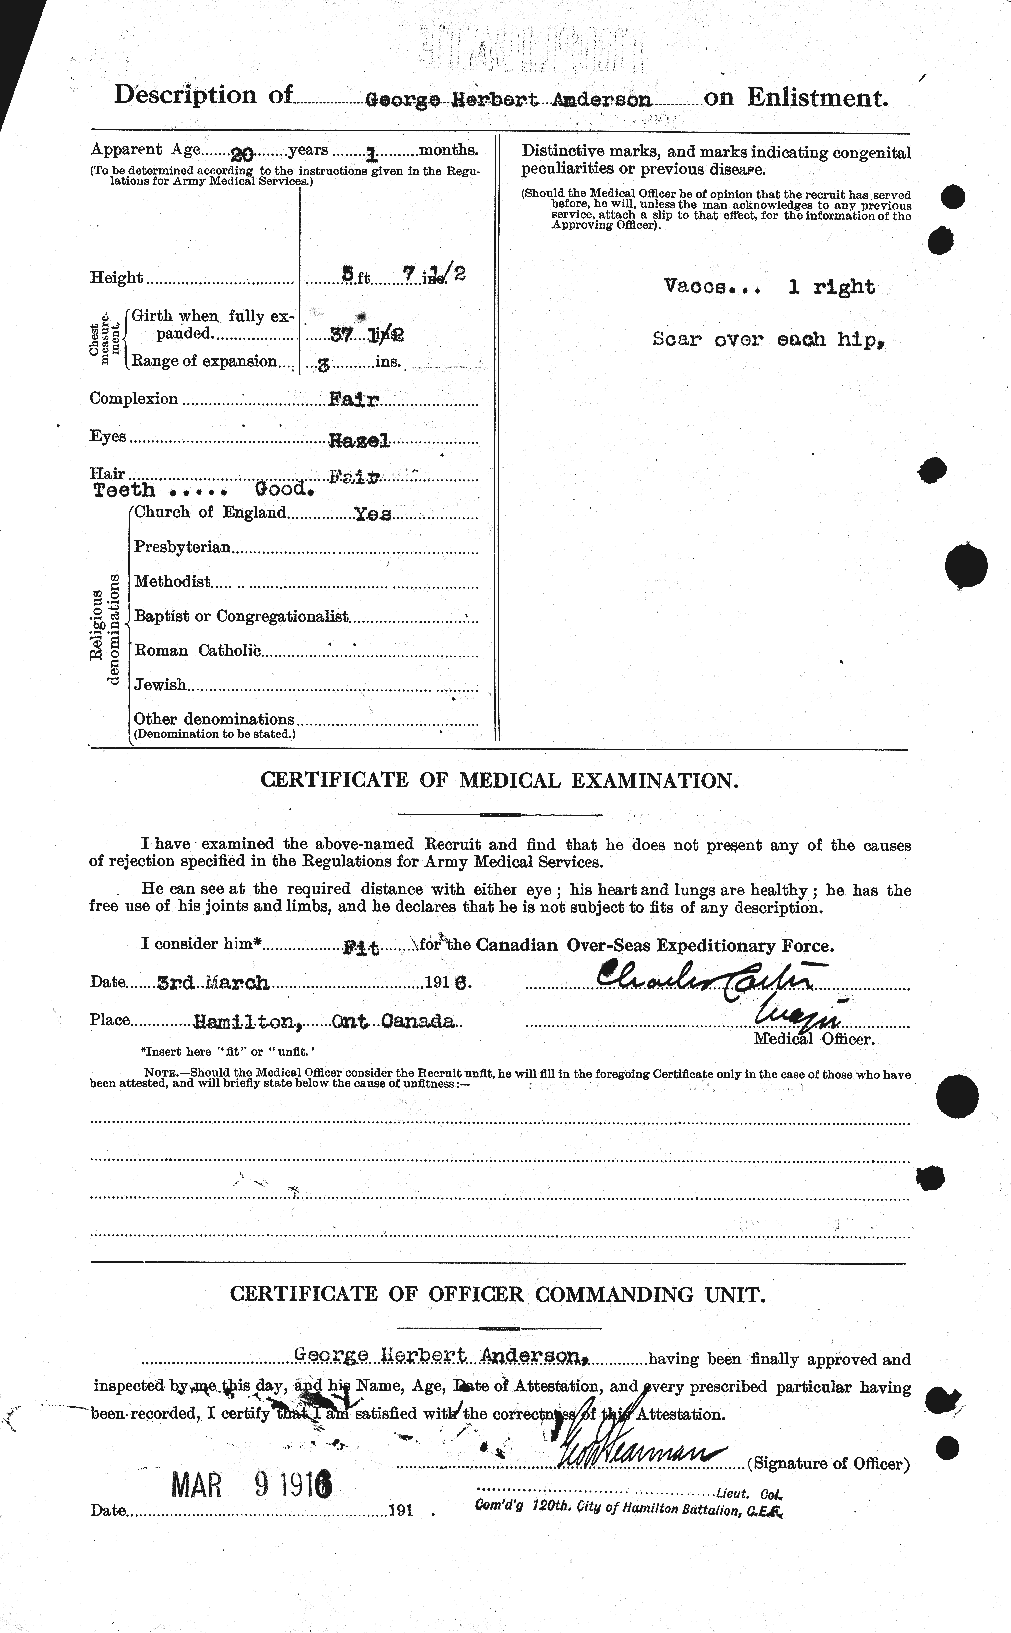 Personnel Records of the First World War - CEF 209721b